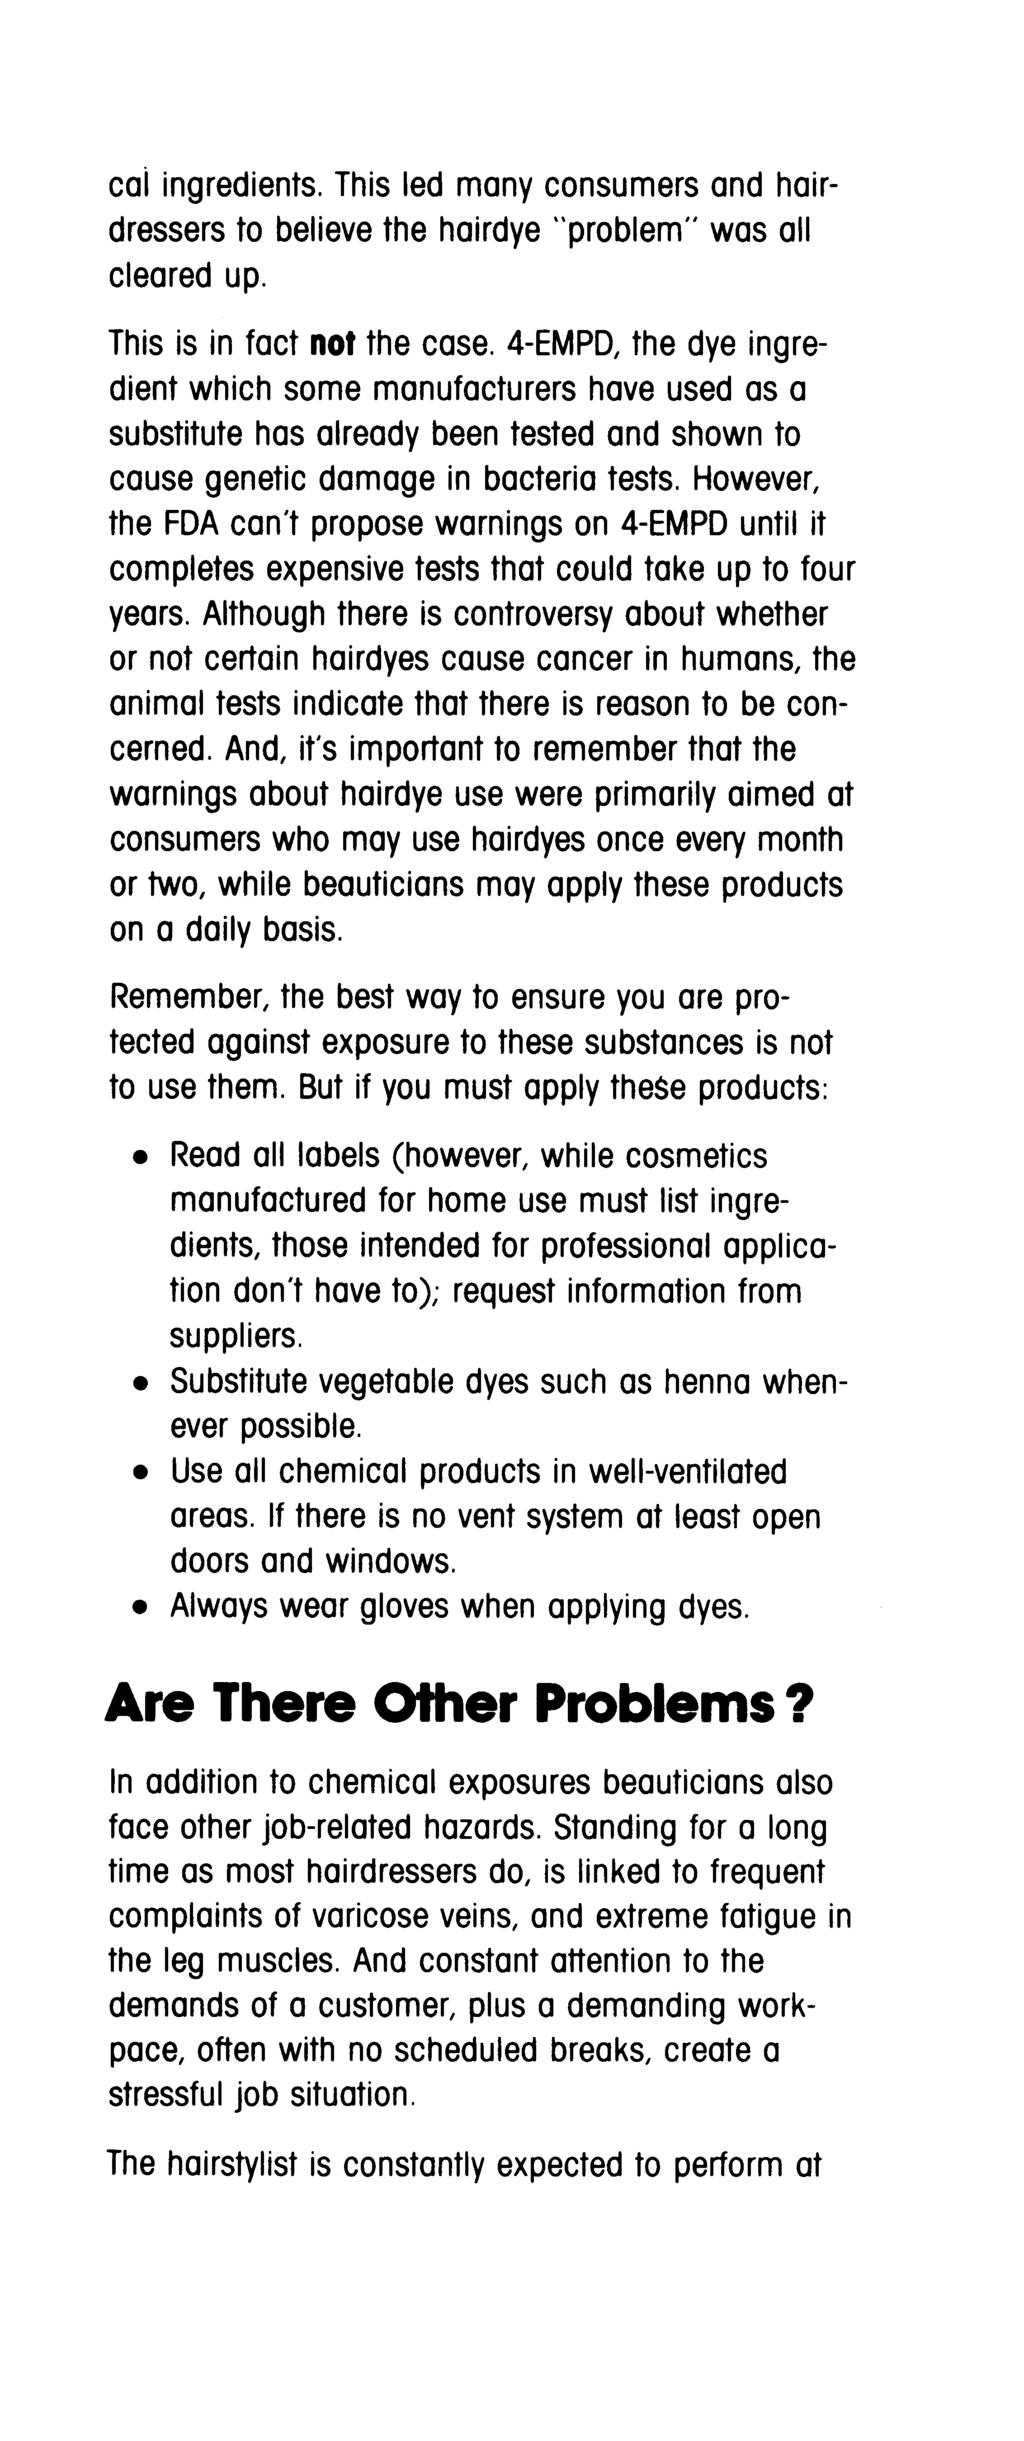 cal ingredients. This led many consumers and hairdressers to believe the hairdye "problem" was all cleared up. This is in fact not the case.